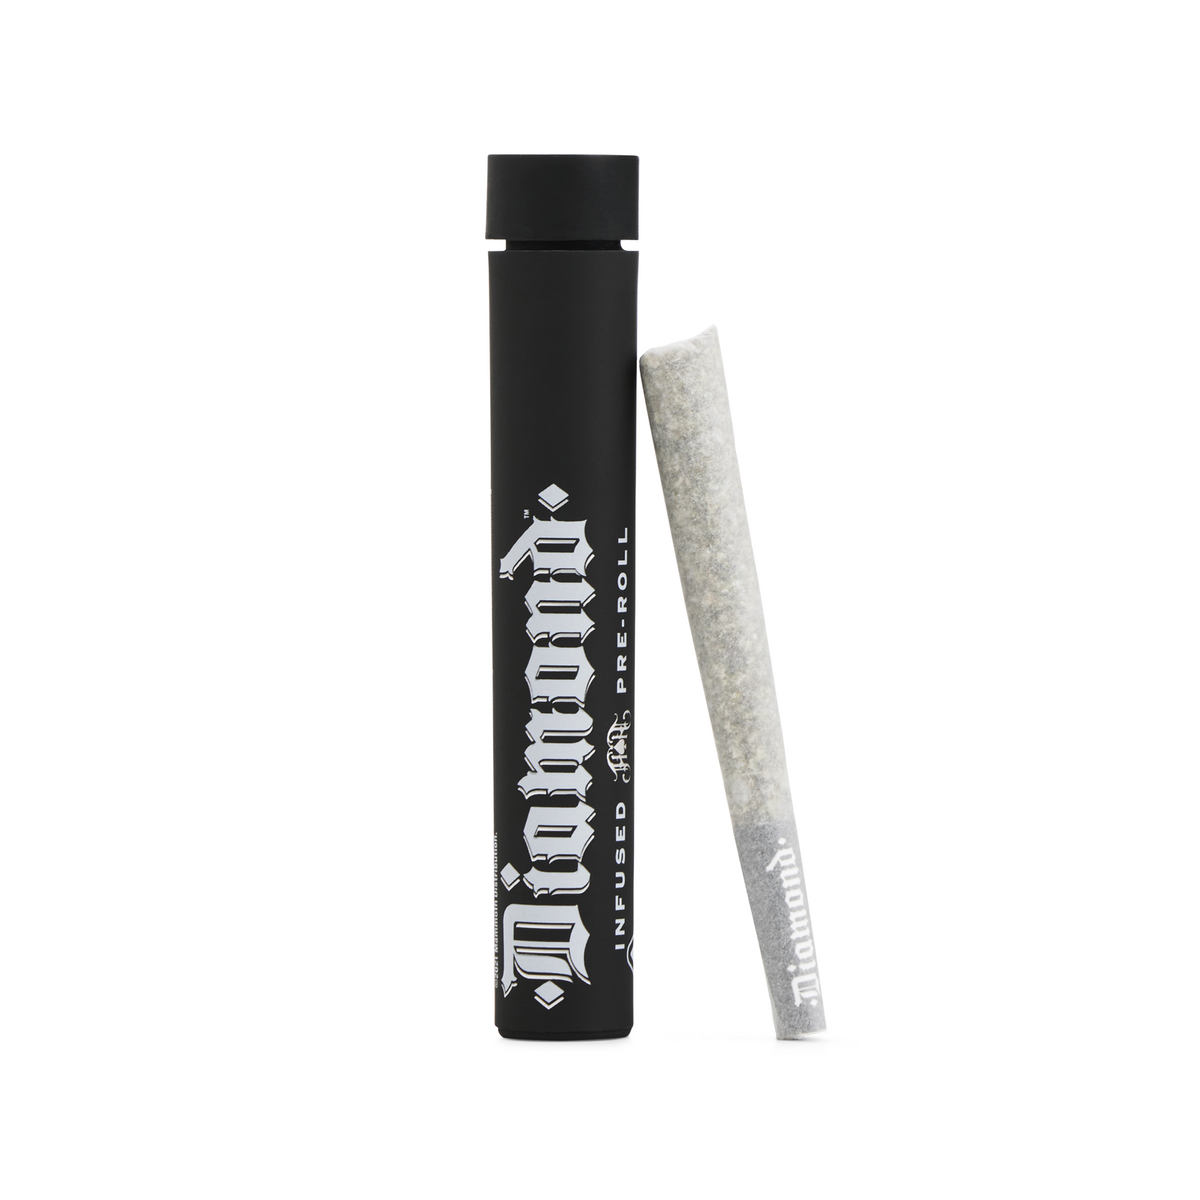 Bubble Bath | Indica - Diamond THCA-Infused Pre-Roll - 1G Joint